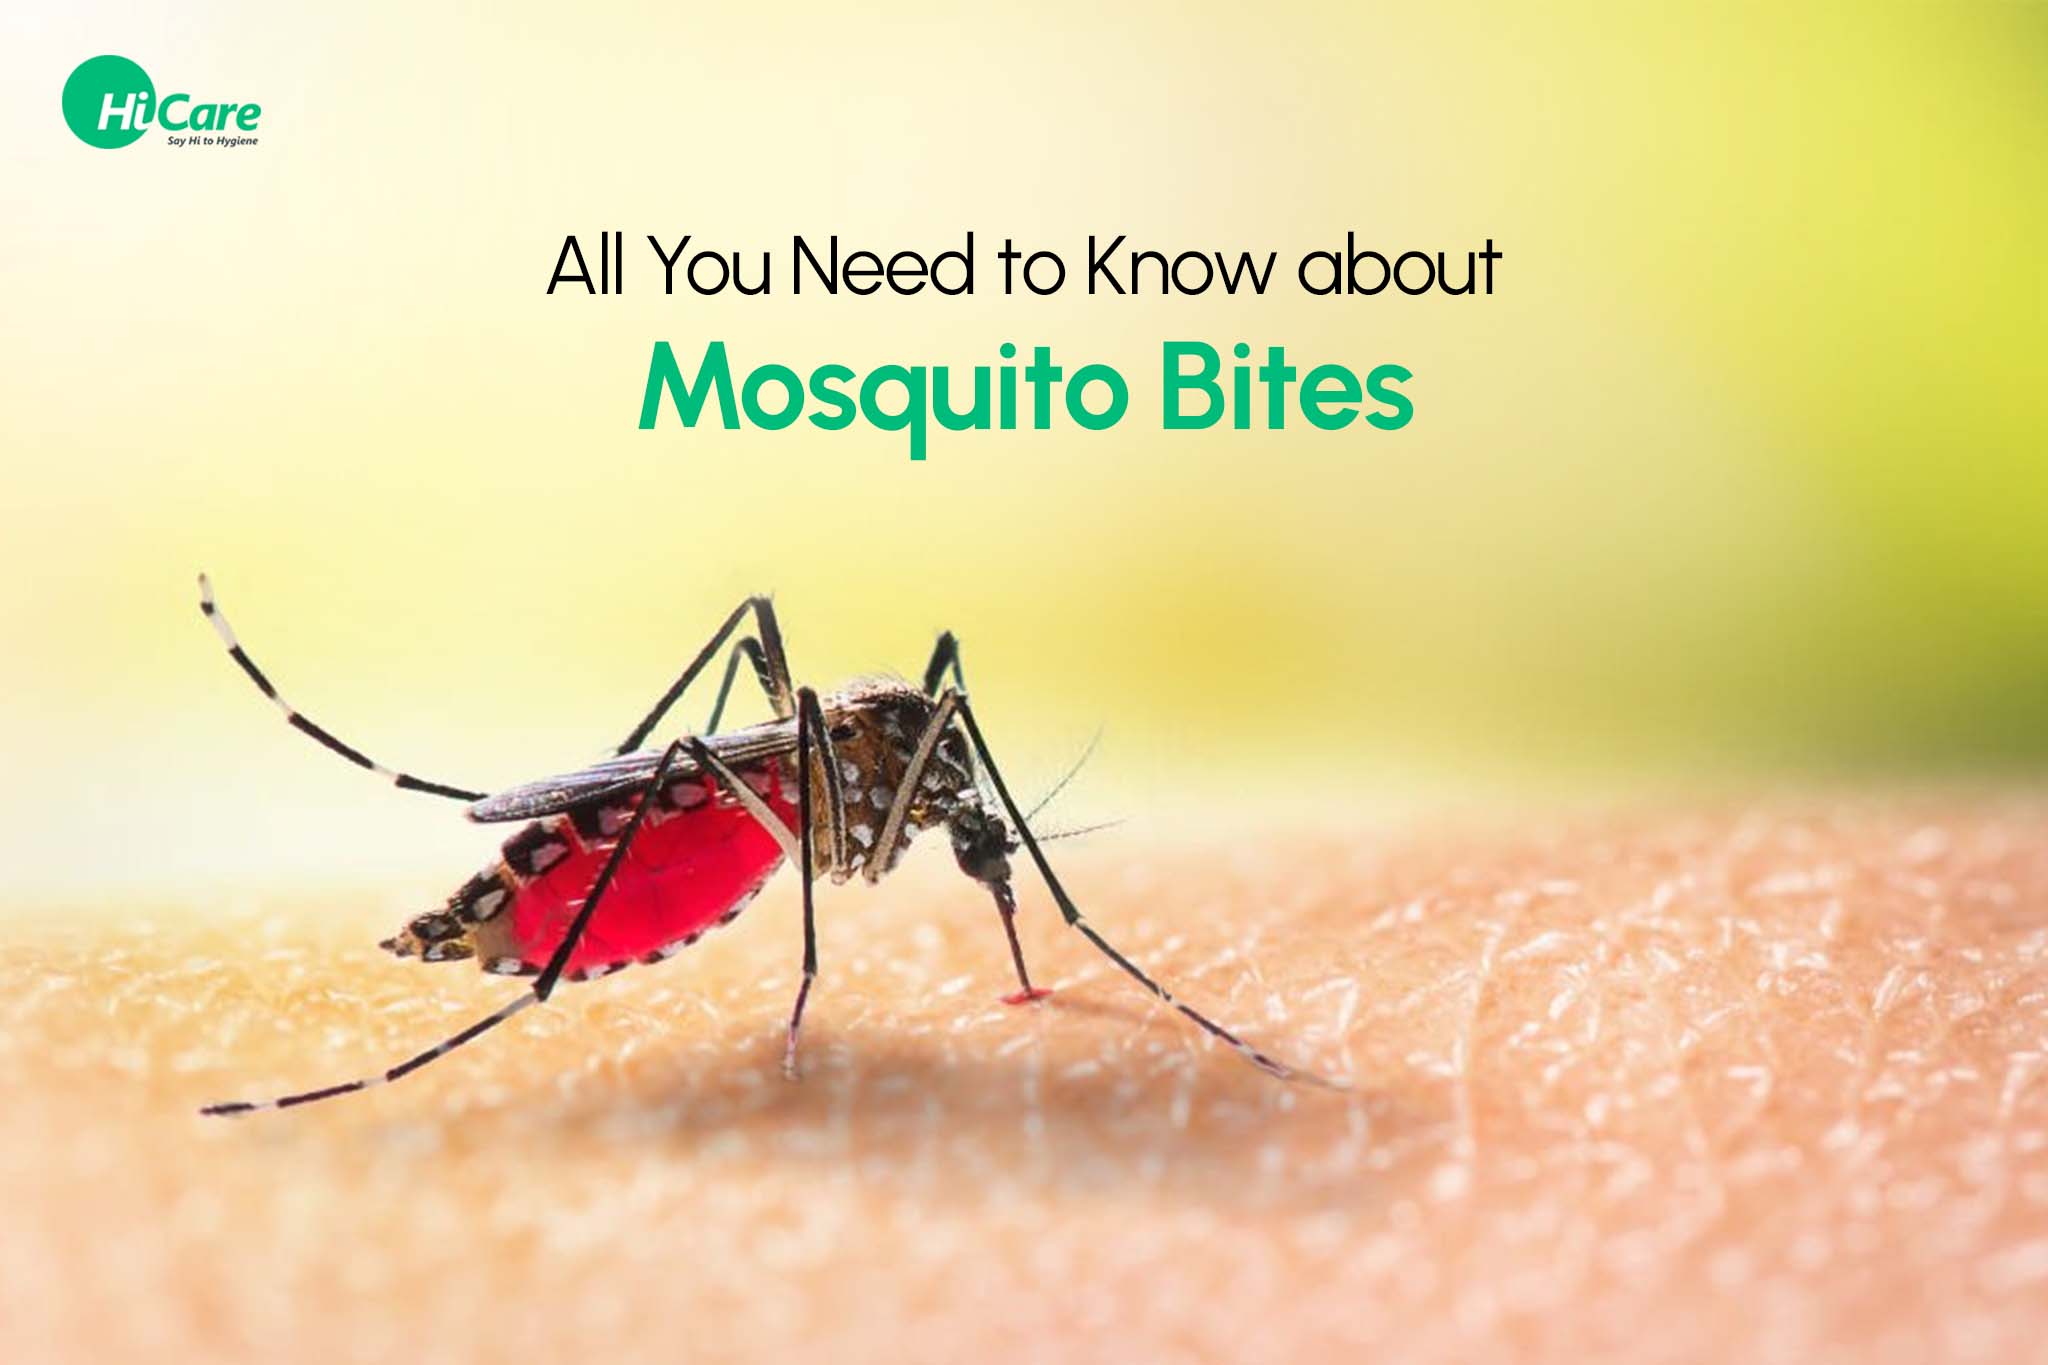 All You Need to Know about Mosquito Bites | HiCare